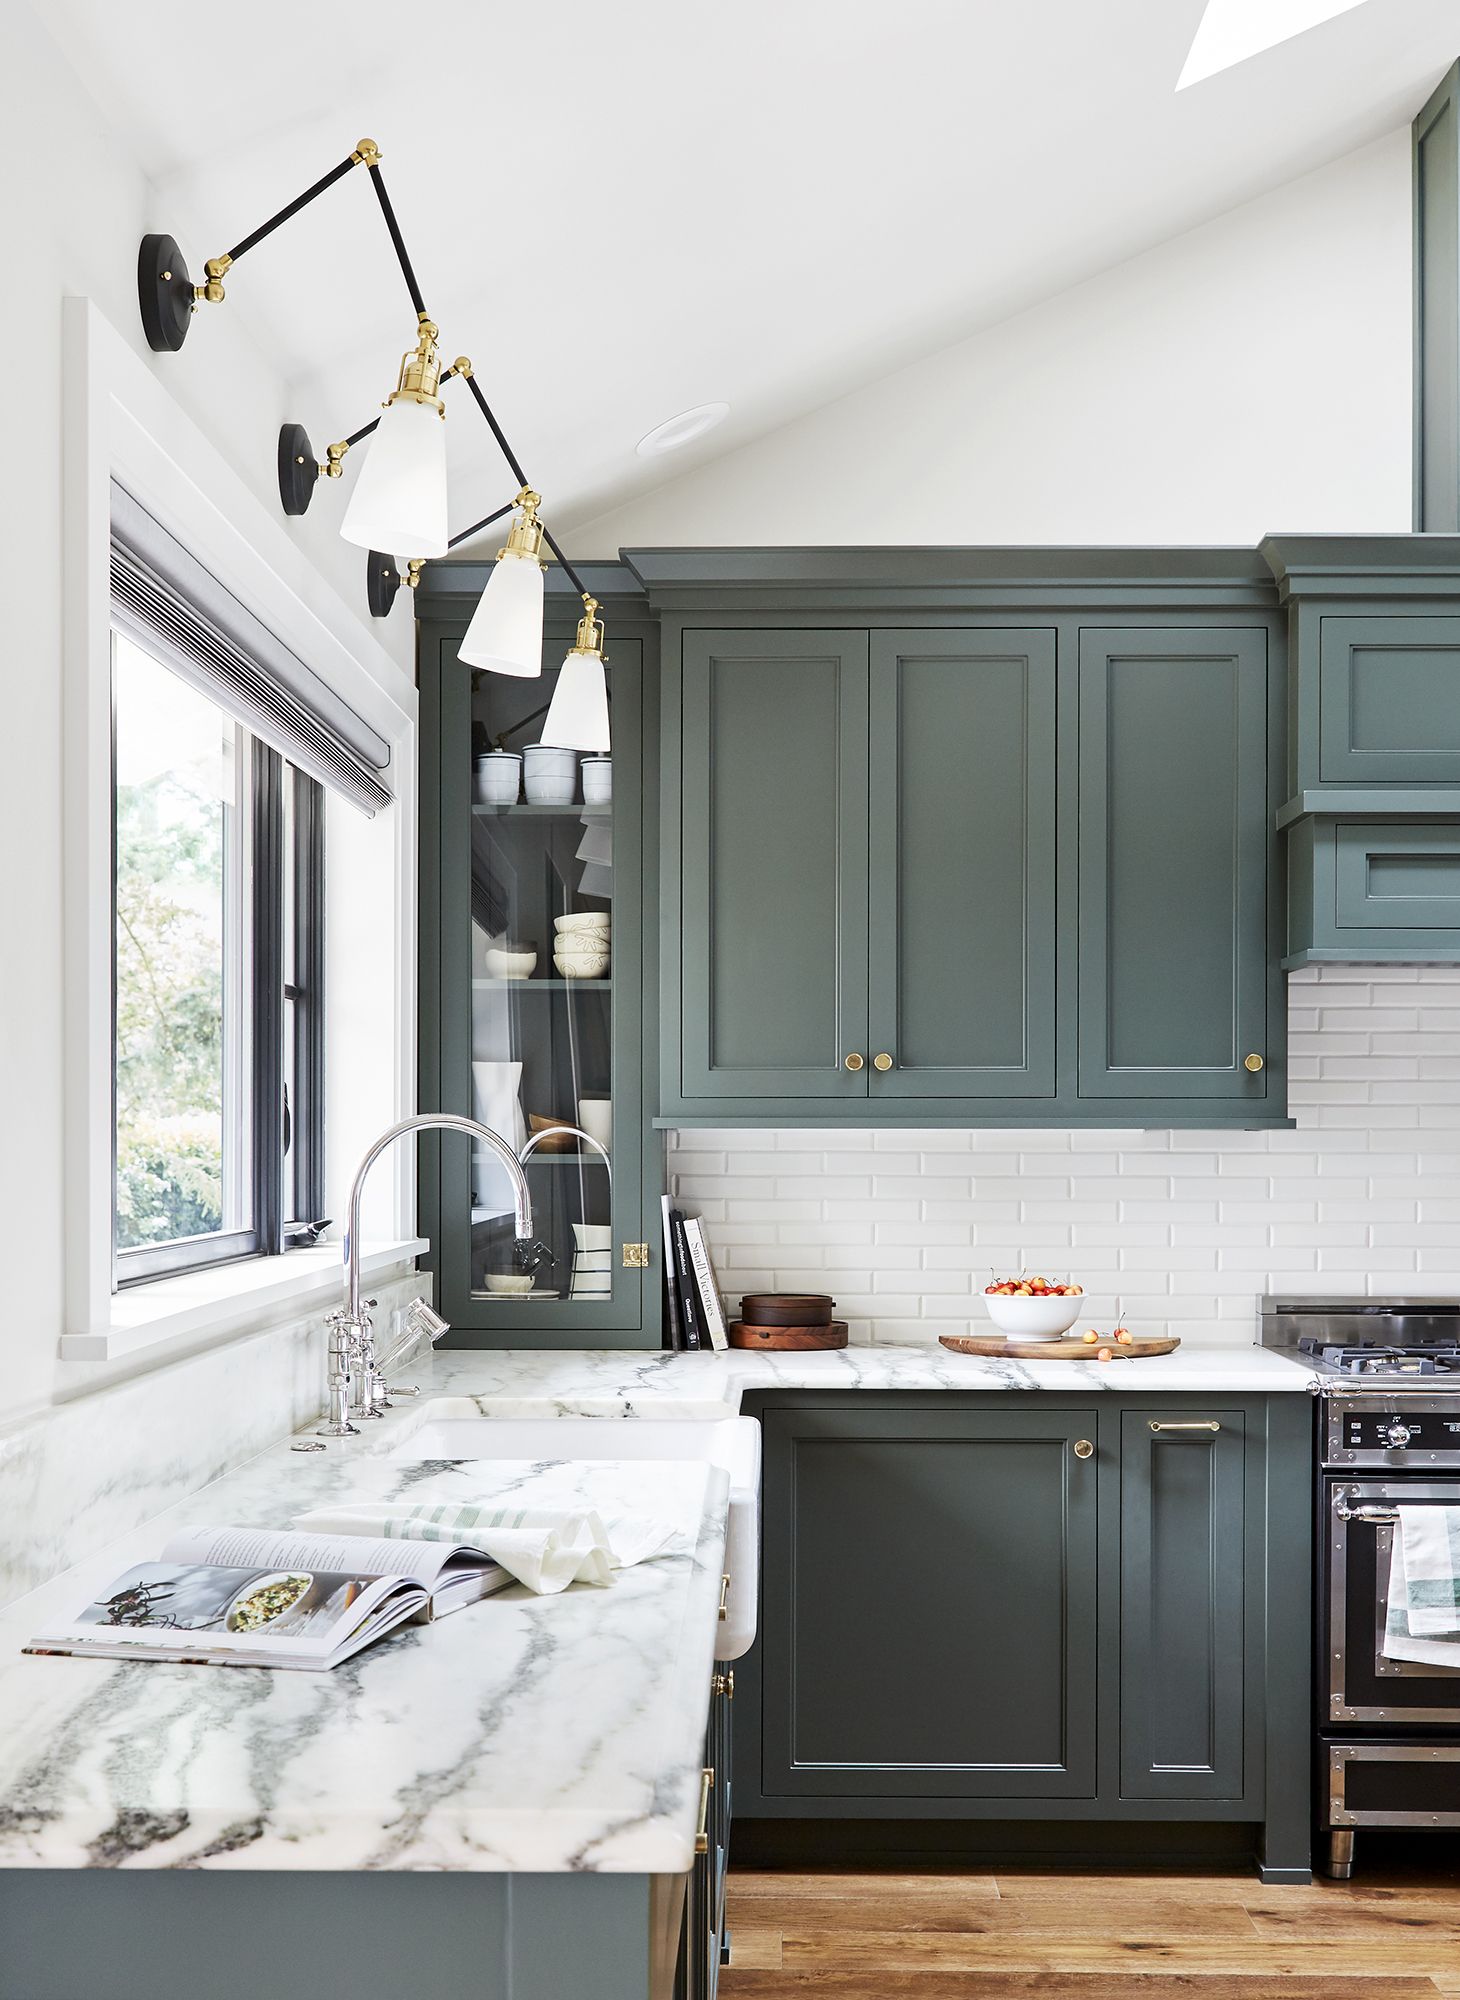 How To Paint Your Kitchen Cabinets, Can We Paint Old Kitchen Cabinets